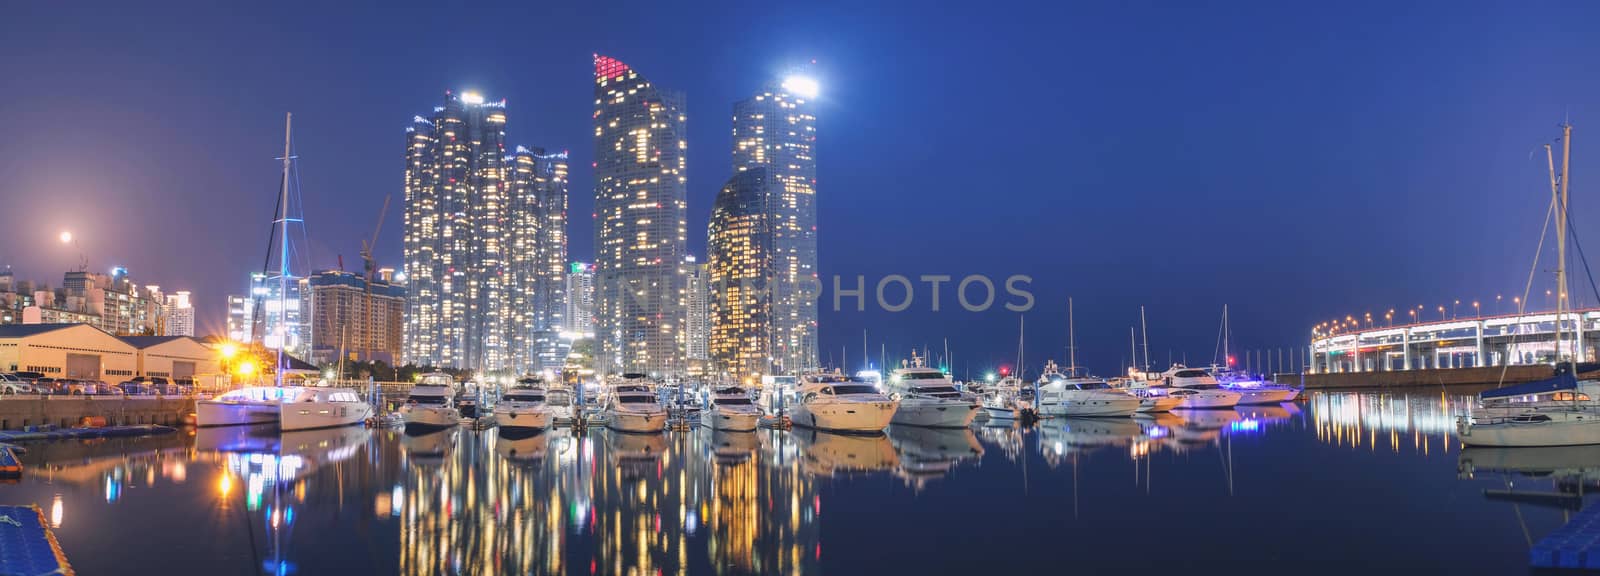 Panorama night view of Skyscrapers Busan Marine City with reflection 